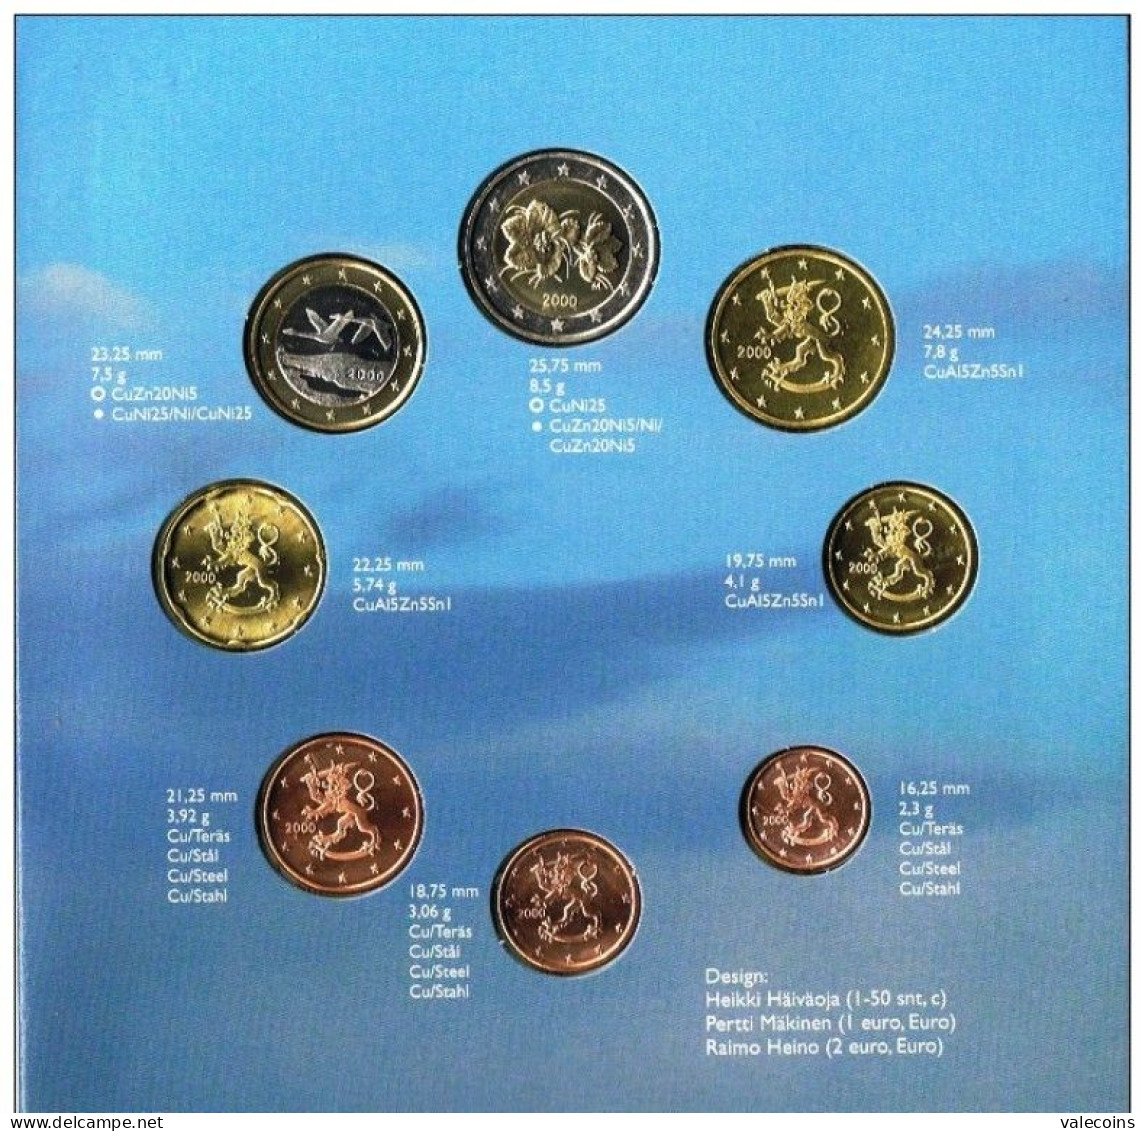 FINLANDIA SUOMI FINLAND FINNLAND - 24 COINS - KMS OFFICIAL ISSUE 1999-2000-2001 YEAR SET - LIMITED ISSUE